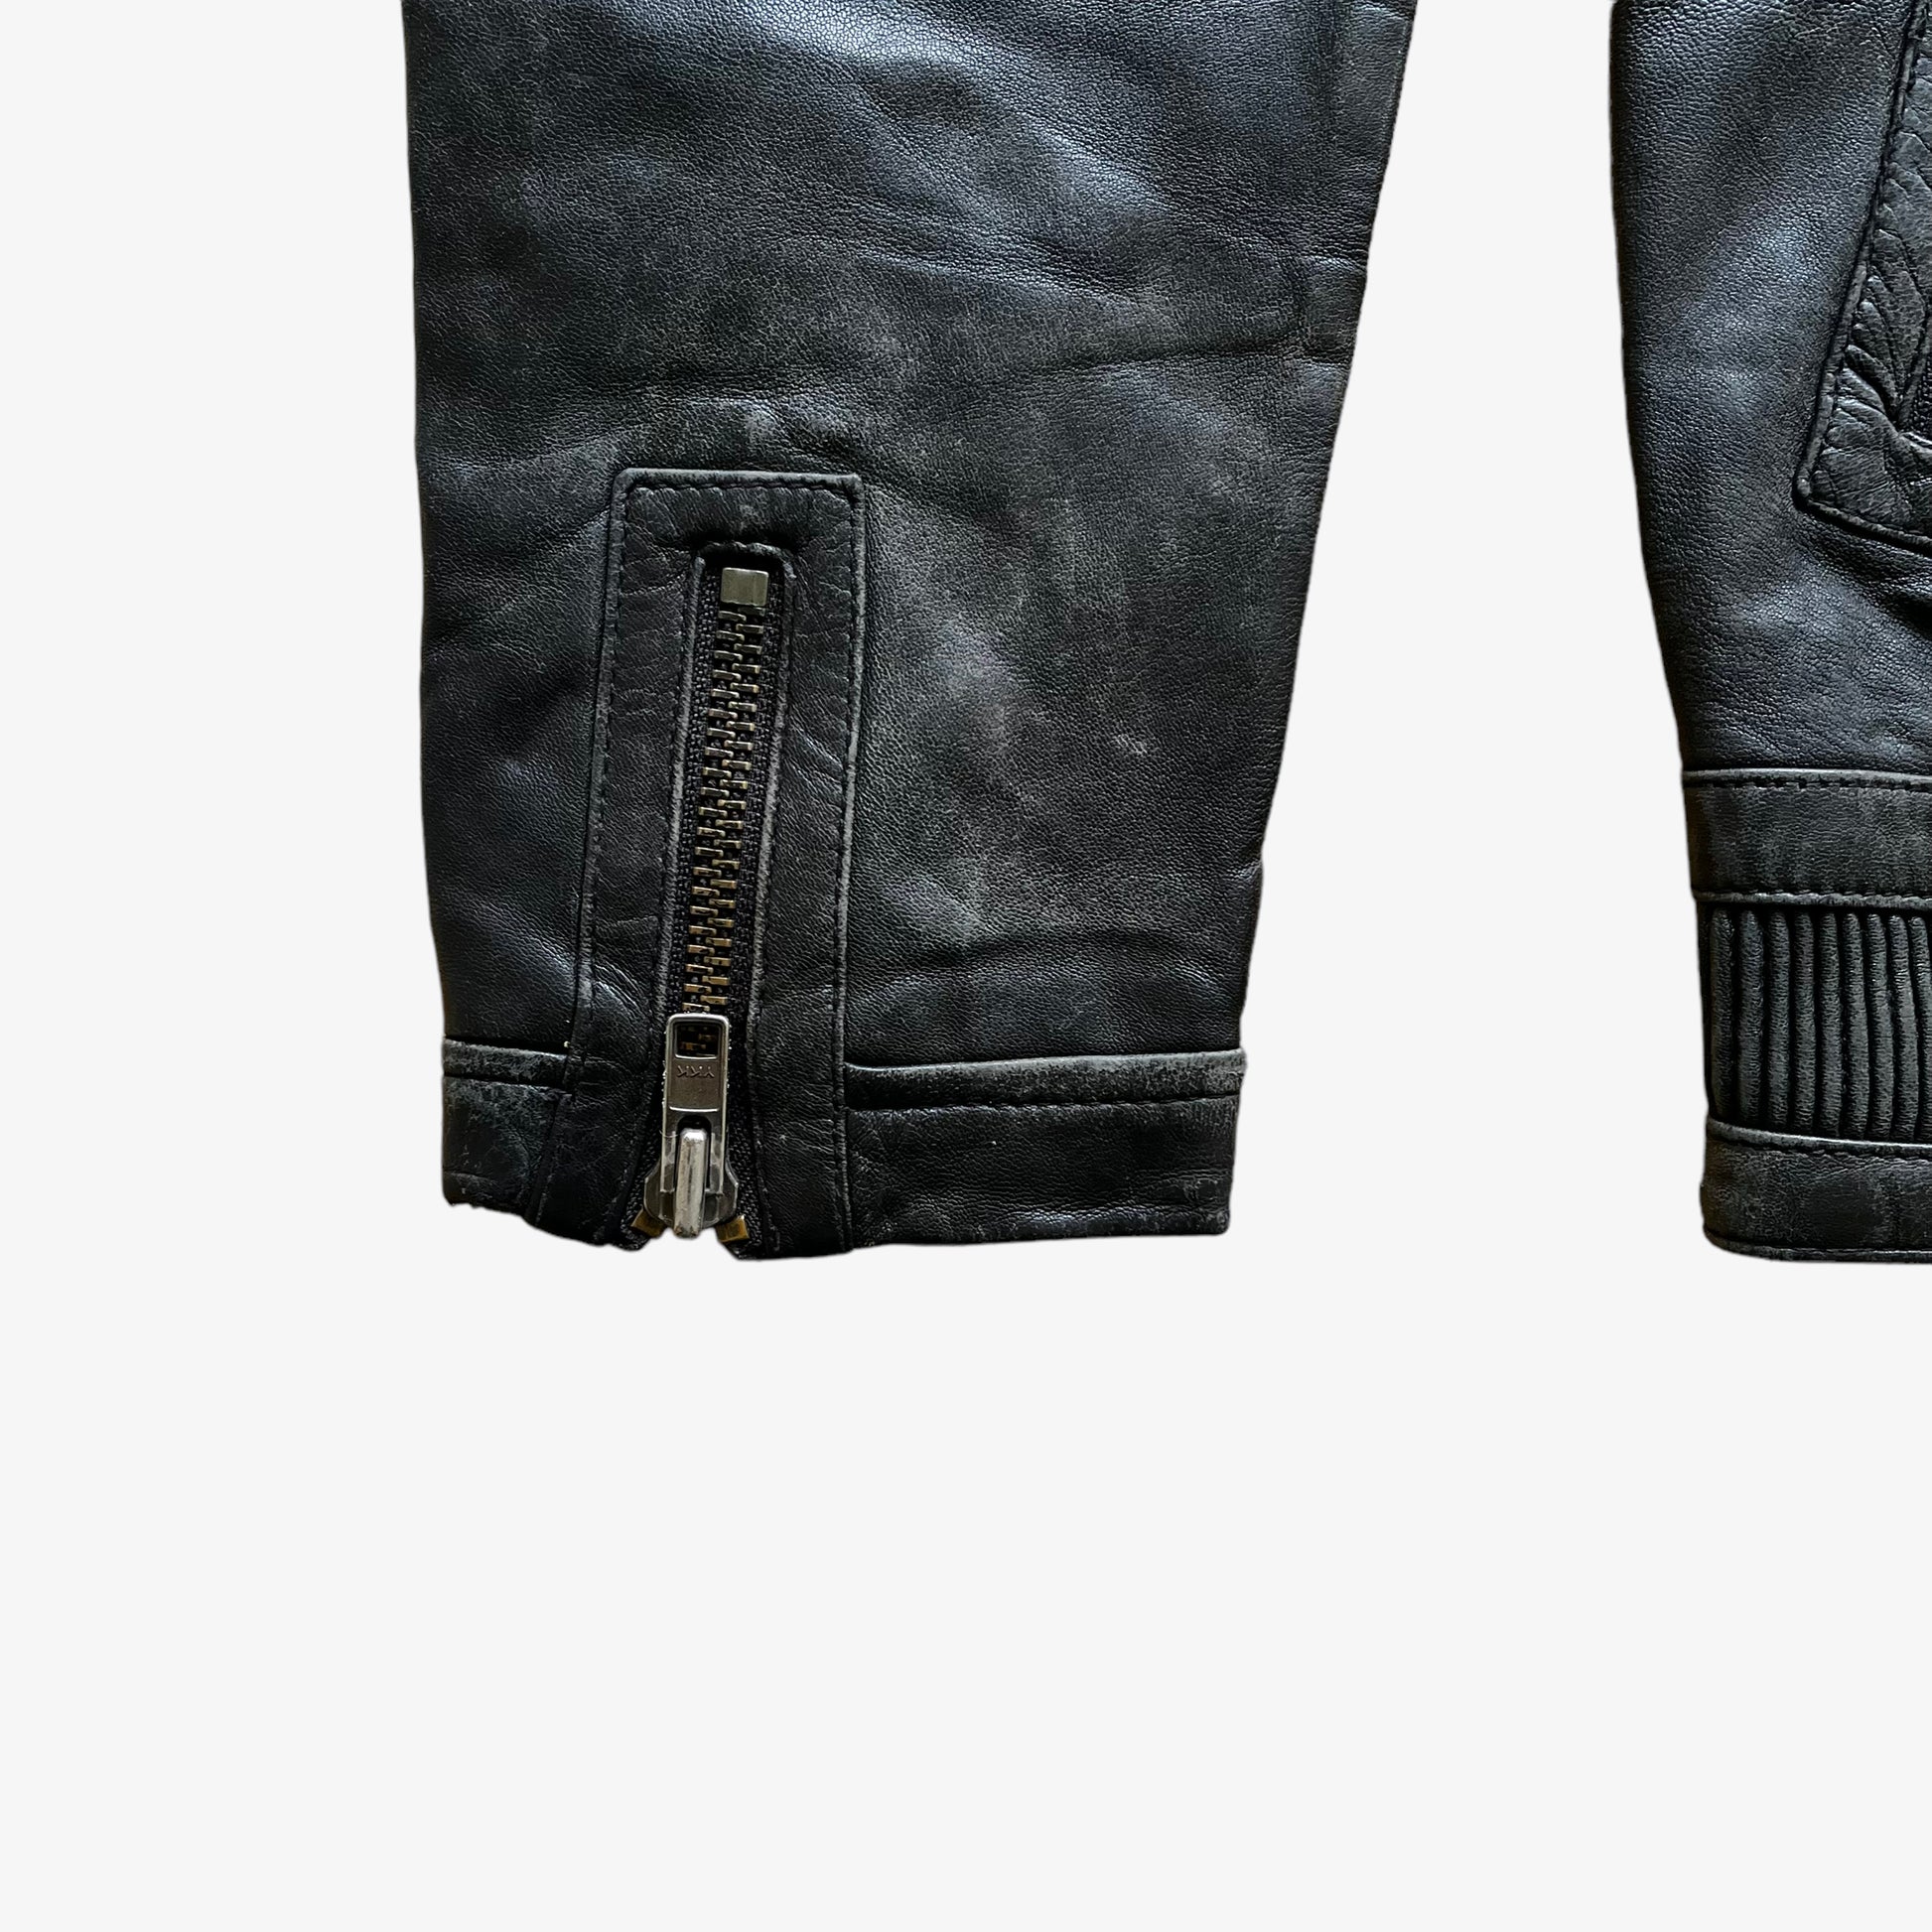 The Kooples Black Leather Driving Jacket Cuff - Casspios Dream